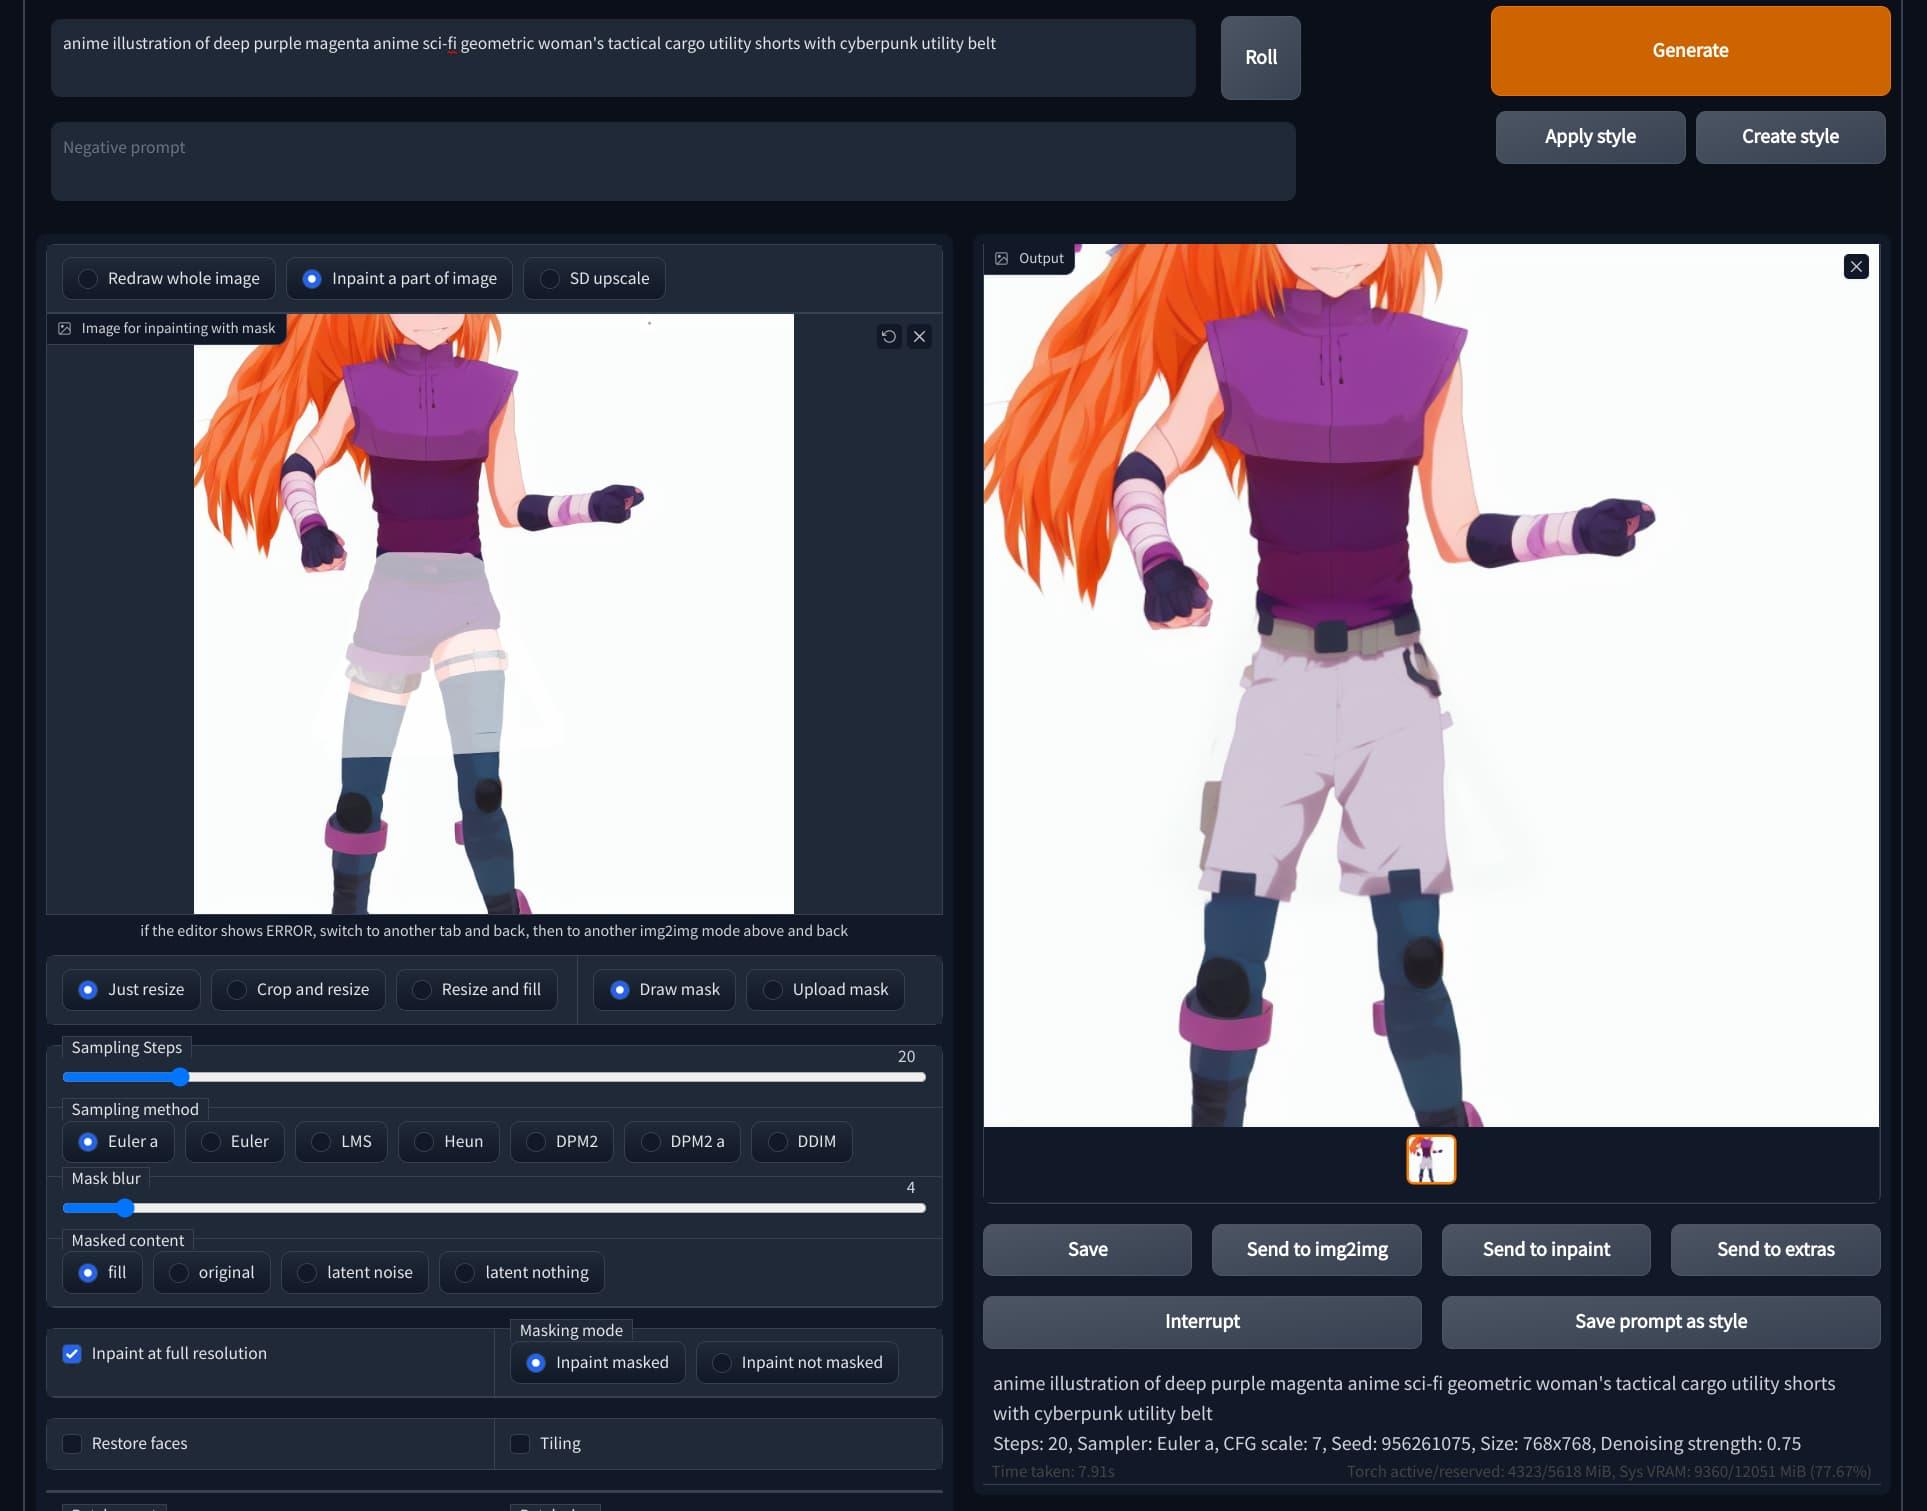 A screenshot from the Automatic1111 Stable Diffusion web interface, showing a before and after image. An area of the before image has been highlighted, and in the after image, a pair of pink shorts has been generated to fill the image